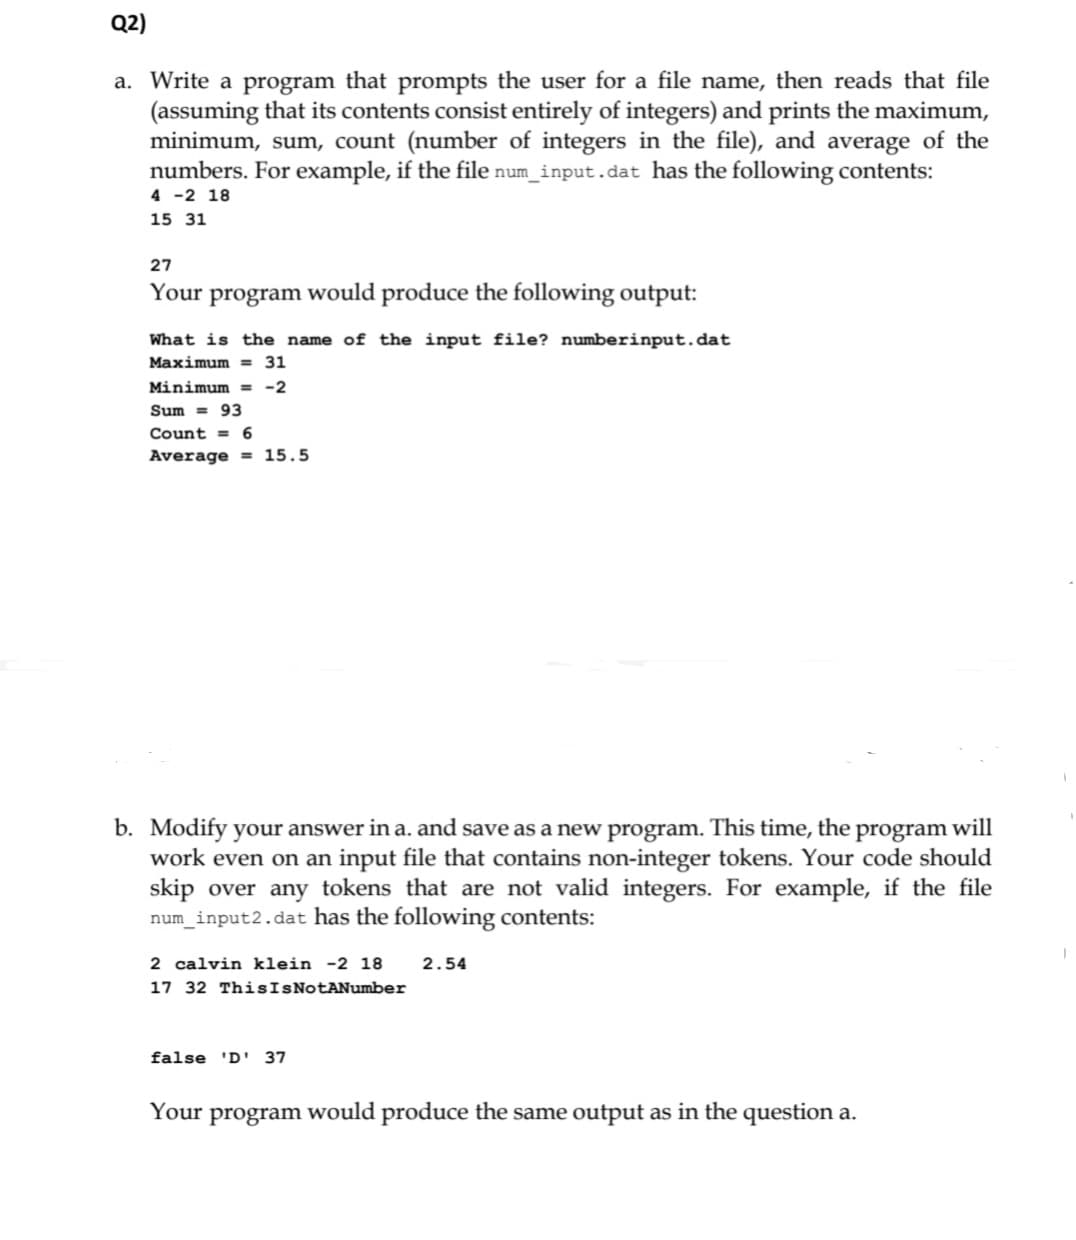 Q2)
a. Write a program that prompts the user for a file name, then reads that file
(assuming that its contents consist entirely of integers) and prints the maximum,
minimum, sum, count (number of integers in the file), and average of the
numbers. For example, if the file num_input.dat has the following contents:
4 -2 18
15 31
27
Your
program would produce the following output:
What is the name of the input file? numberinput.dat
Maximum = 31
Minimum = -2
Sum = 93
Count = 6
Average = 15.5
b. Modify your answer in a. and save as a new program. This time, the program will
work even on an input file that contains non-integer tokens. Your code should
skip over any tokens that are not valid integers. For example, if the file
num_input2.dat has the following contents:
2 calvin klein -2 18
2.54
17 32 ThisIsNotANumber
false 'D' 37
Your program would produce the same output as in the question a.
